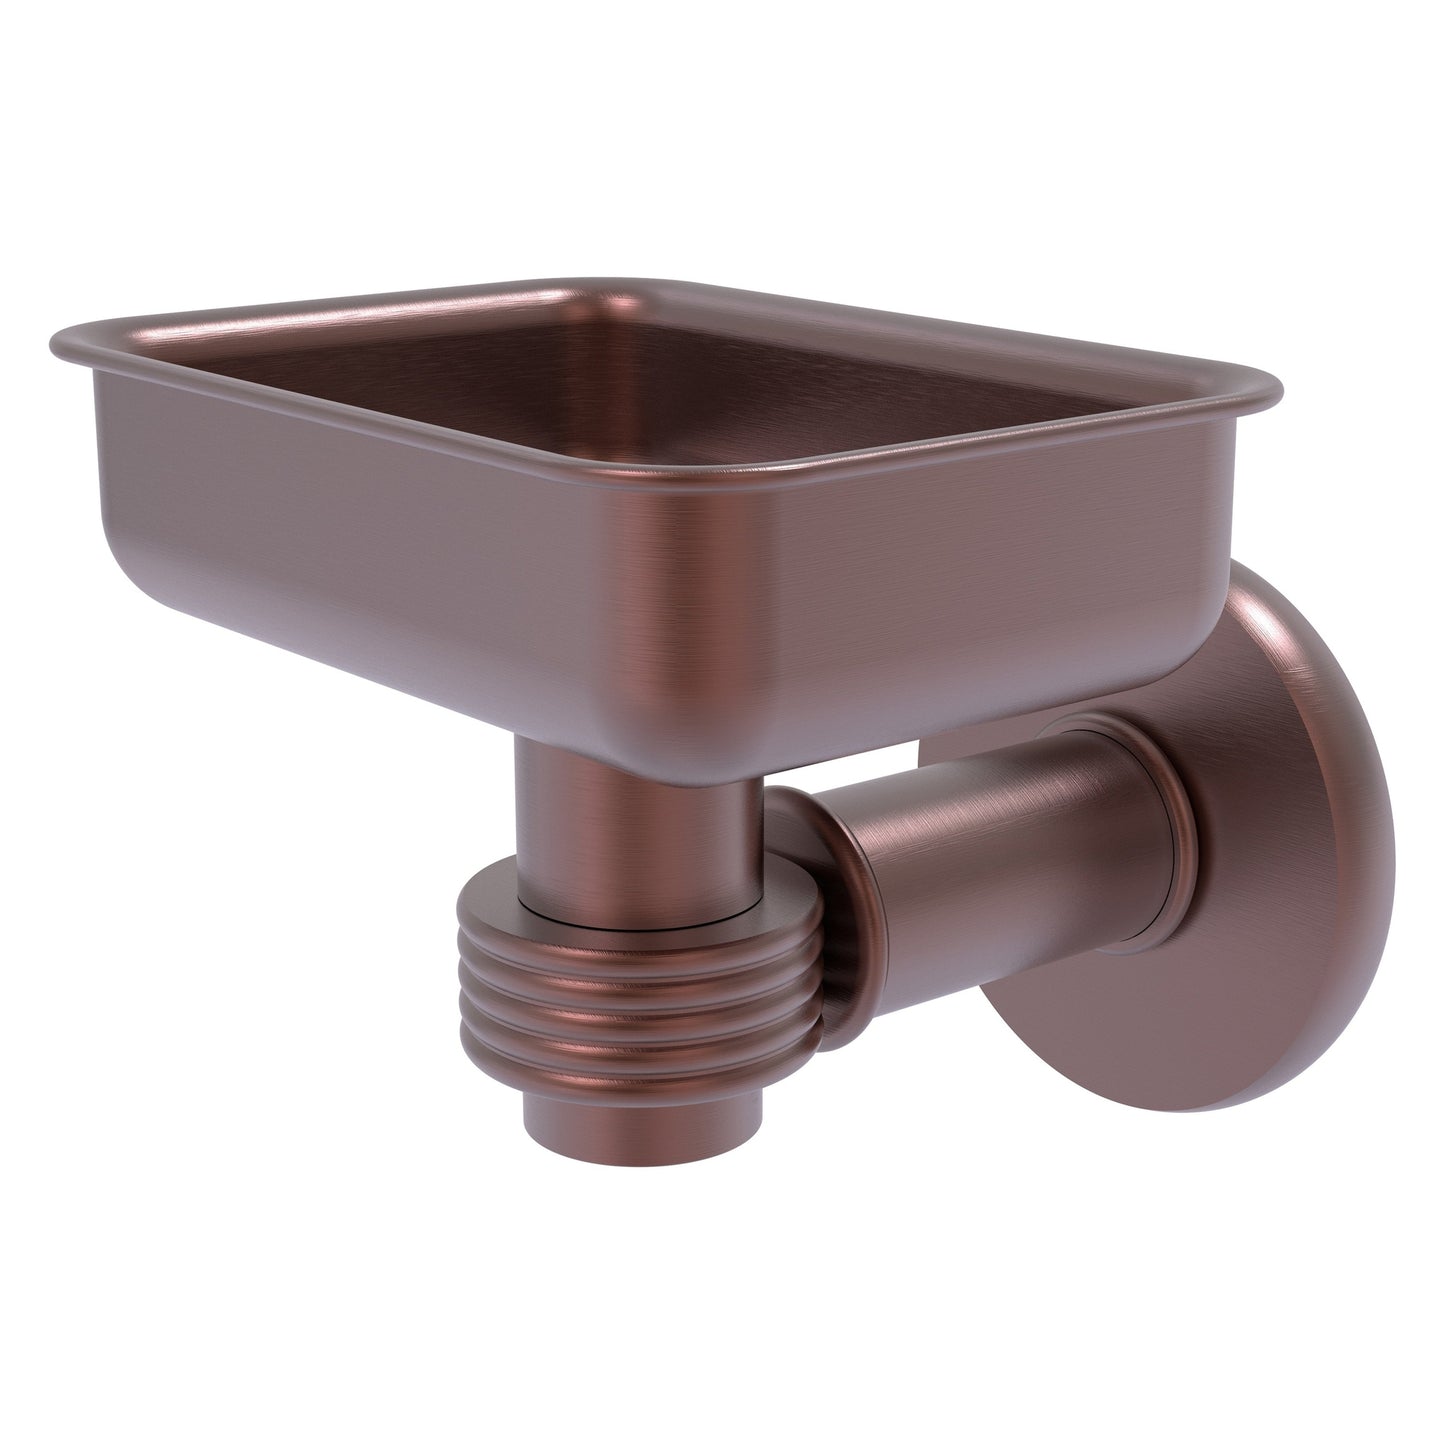 Allied Brass Continental 4.5" x 3.5" Antique Copper Solid Brass Wall-Mounted Soap Dish Holder with Grooved Accents